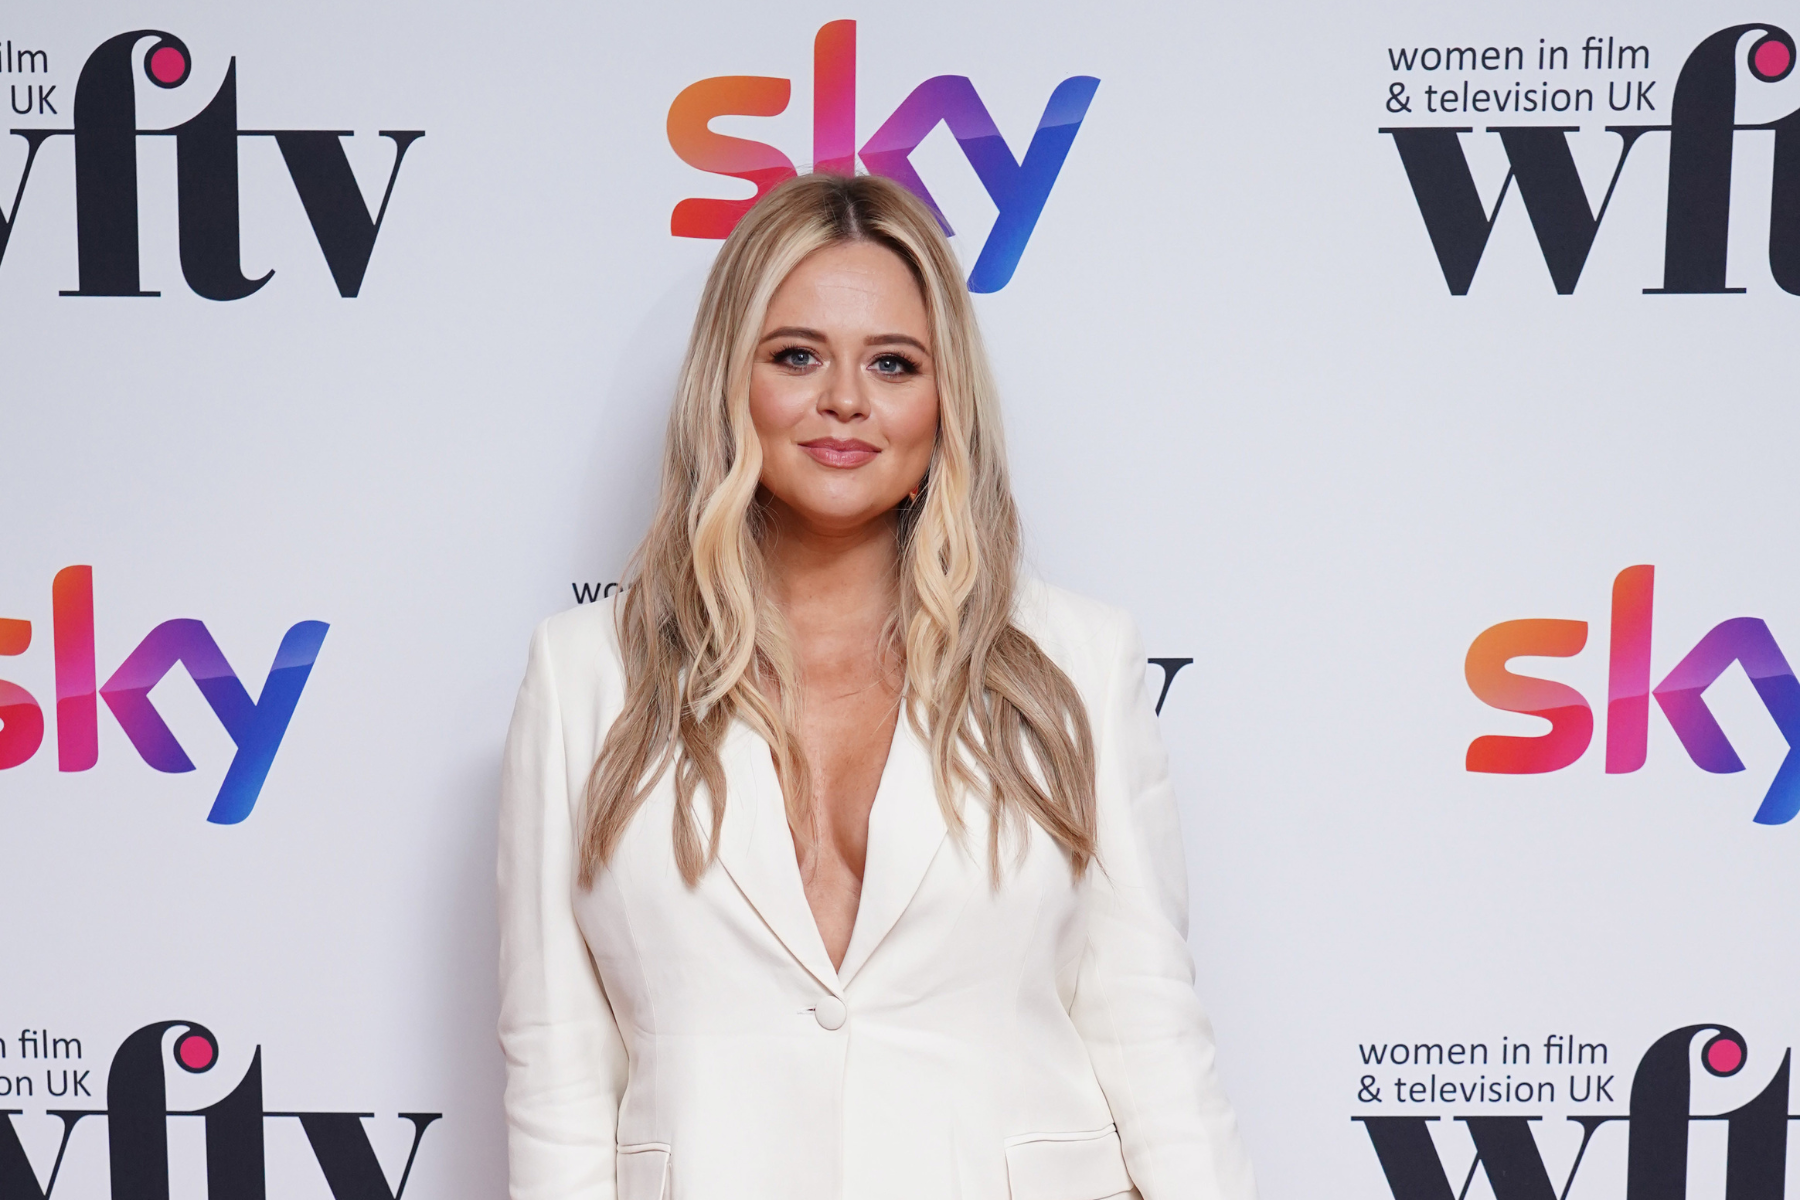 ITV This Morning: Emily Atack reveals she is 'banned' from hosting